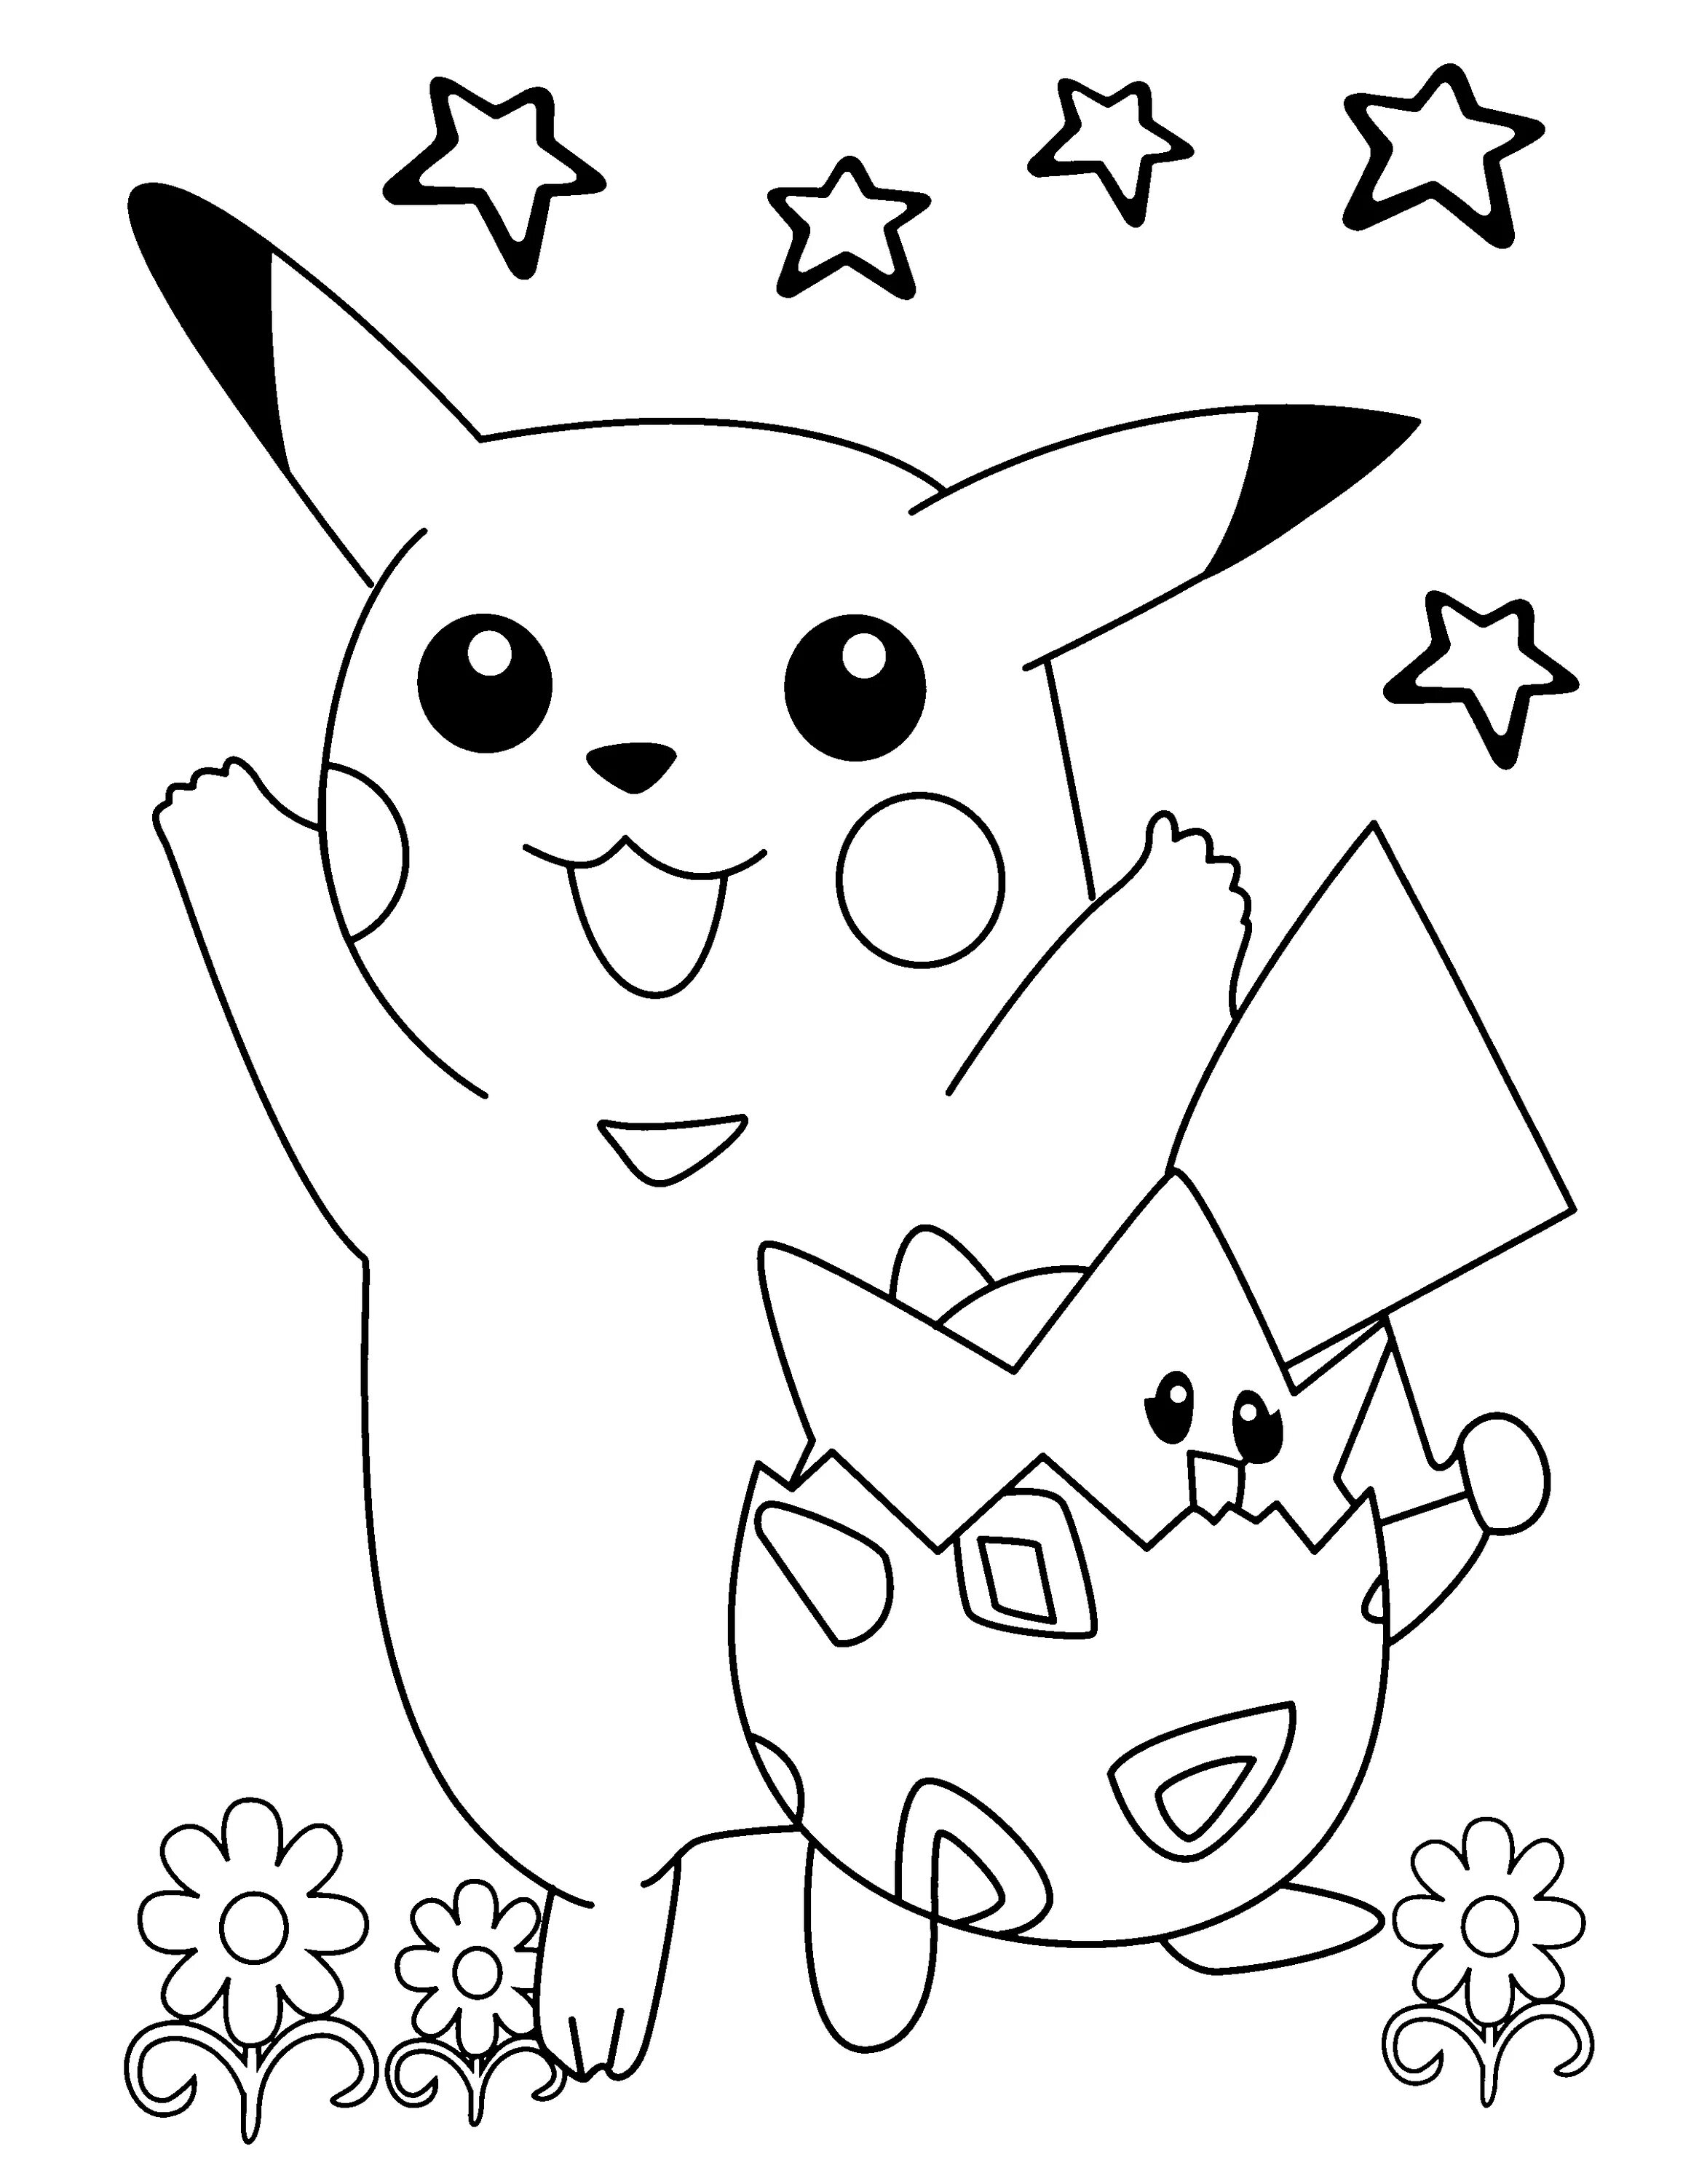 Unforgettable pikachu coloring book